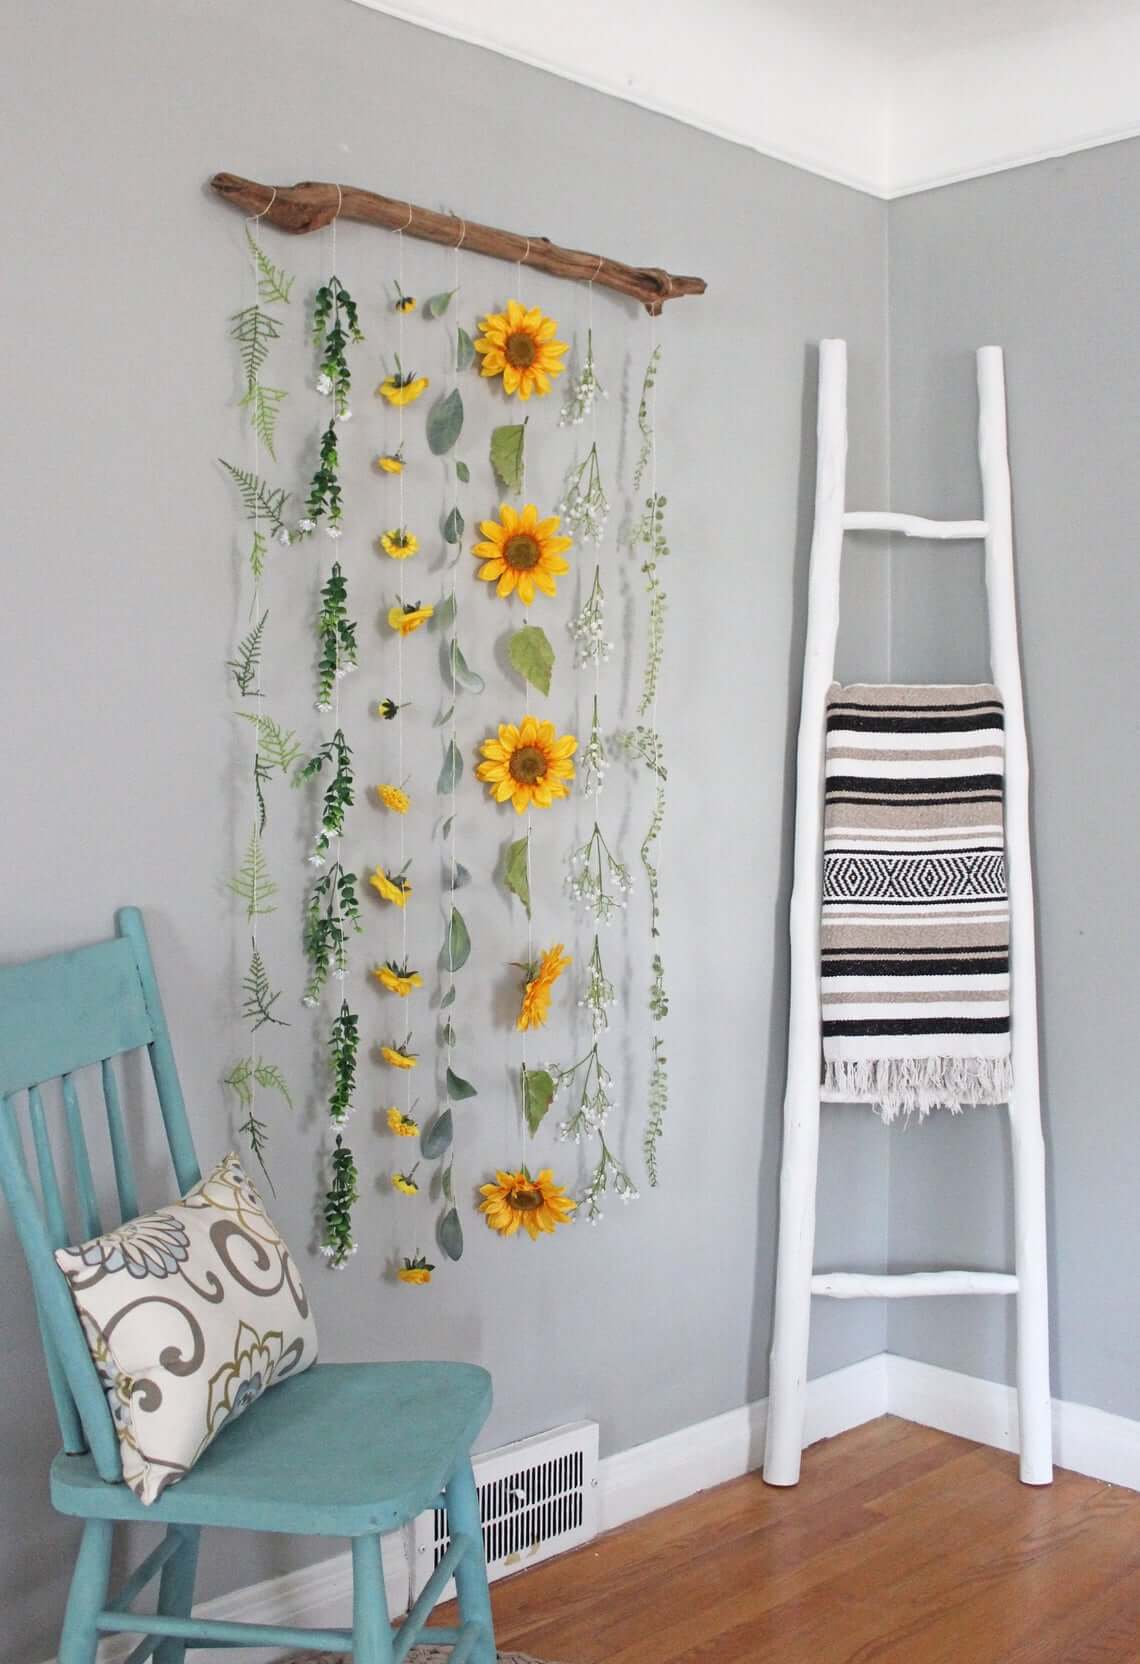 Walking Stick Wilderness Wall Art with Sunflowers and Ferns